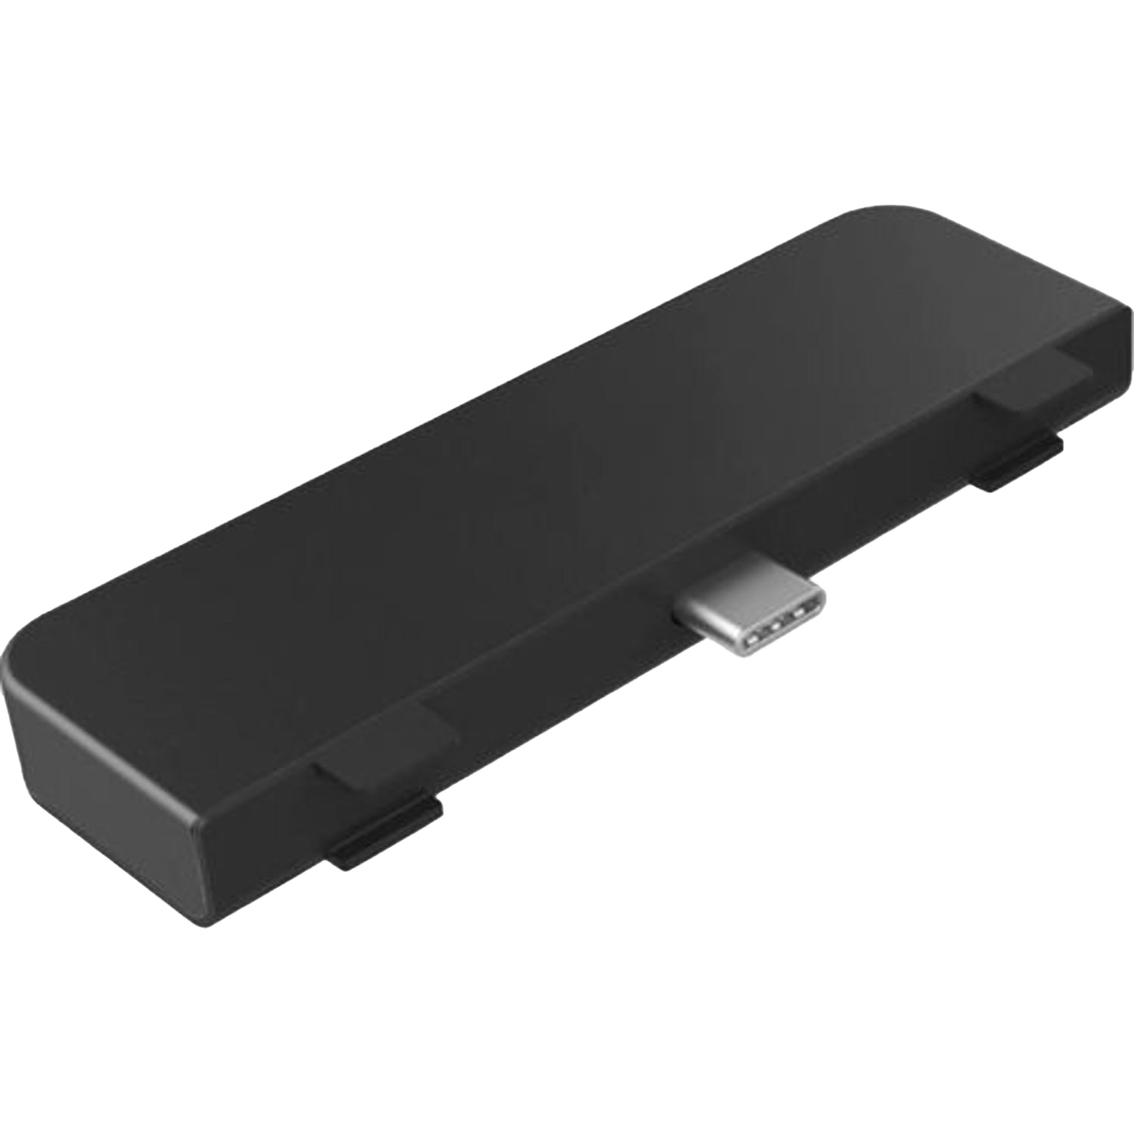 HyperDrive 4-in-1 USB-C Hub for iPad Pro 2018 and 2020 - Image 2 of 2